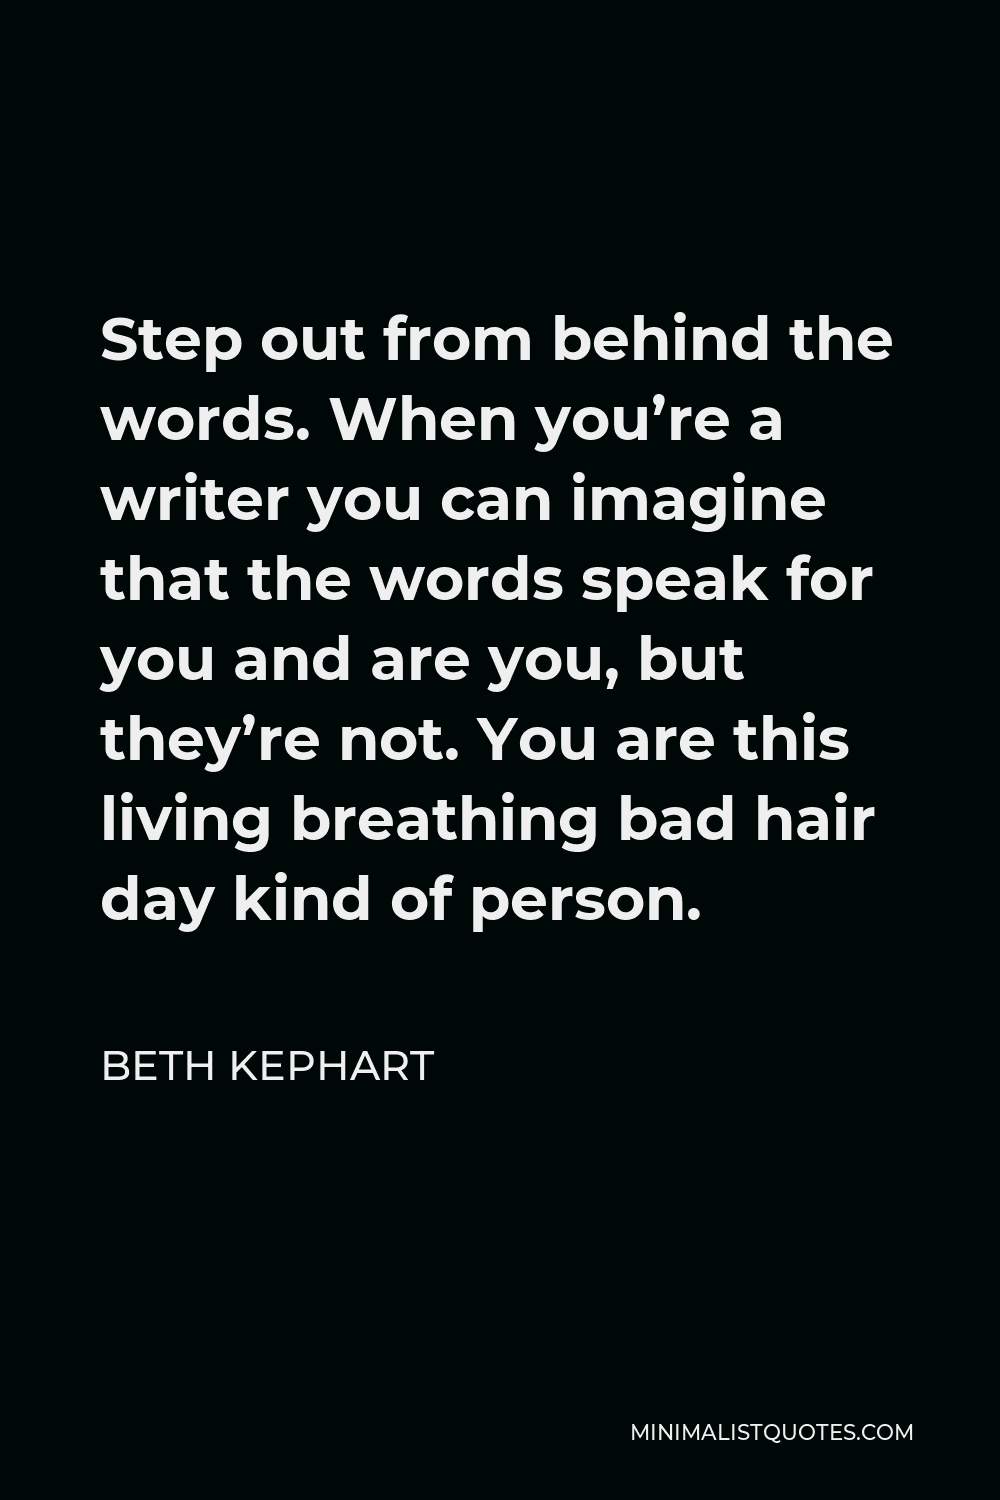 Beth Kephart Quote - Step out from behind the words. When you’re a writer you can imagine that the words speak for you and are you, but they’re not. You are this living breathing bad hair day kind of person.